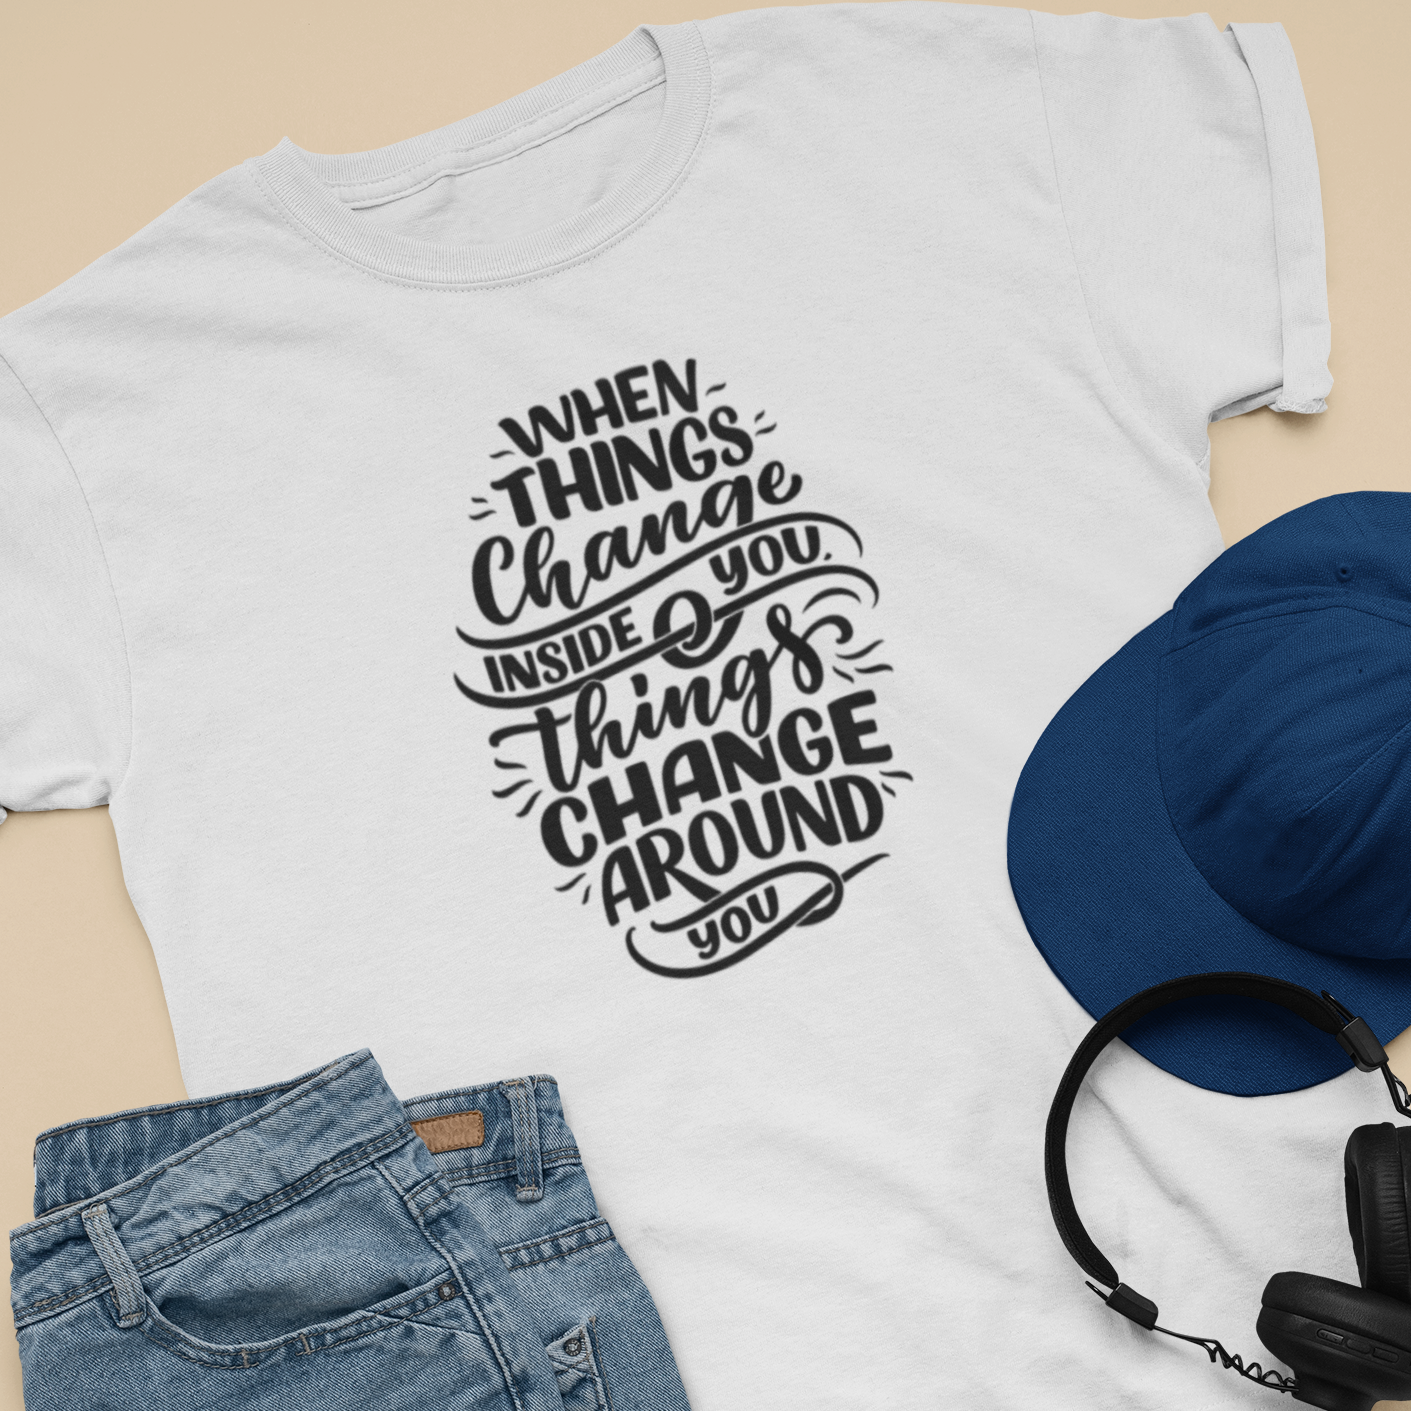 Story of Awakening Lifestyle Community Spirituality Relationships Love Light Meditation Oneness Earth Balance Healing Shop Store Charity Tree Nature Read Write T shirt Tops Tees Clothing Women Horoscope Organic Cotton When Things Change Inside You Change Around You Quote